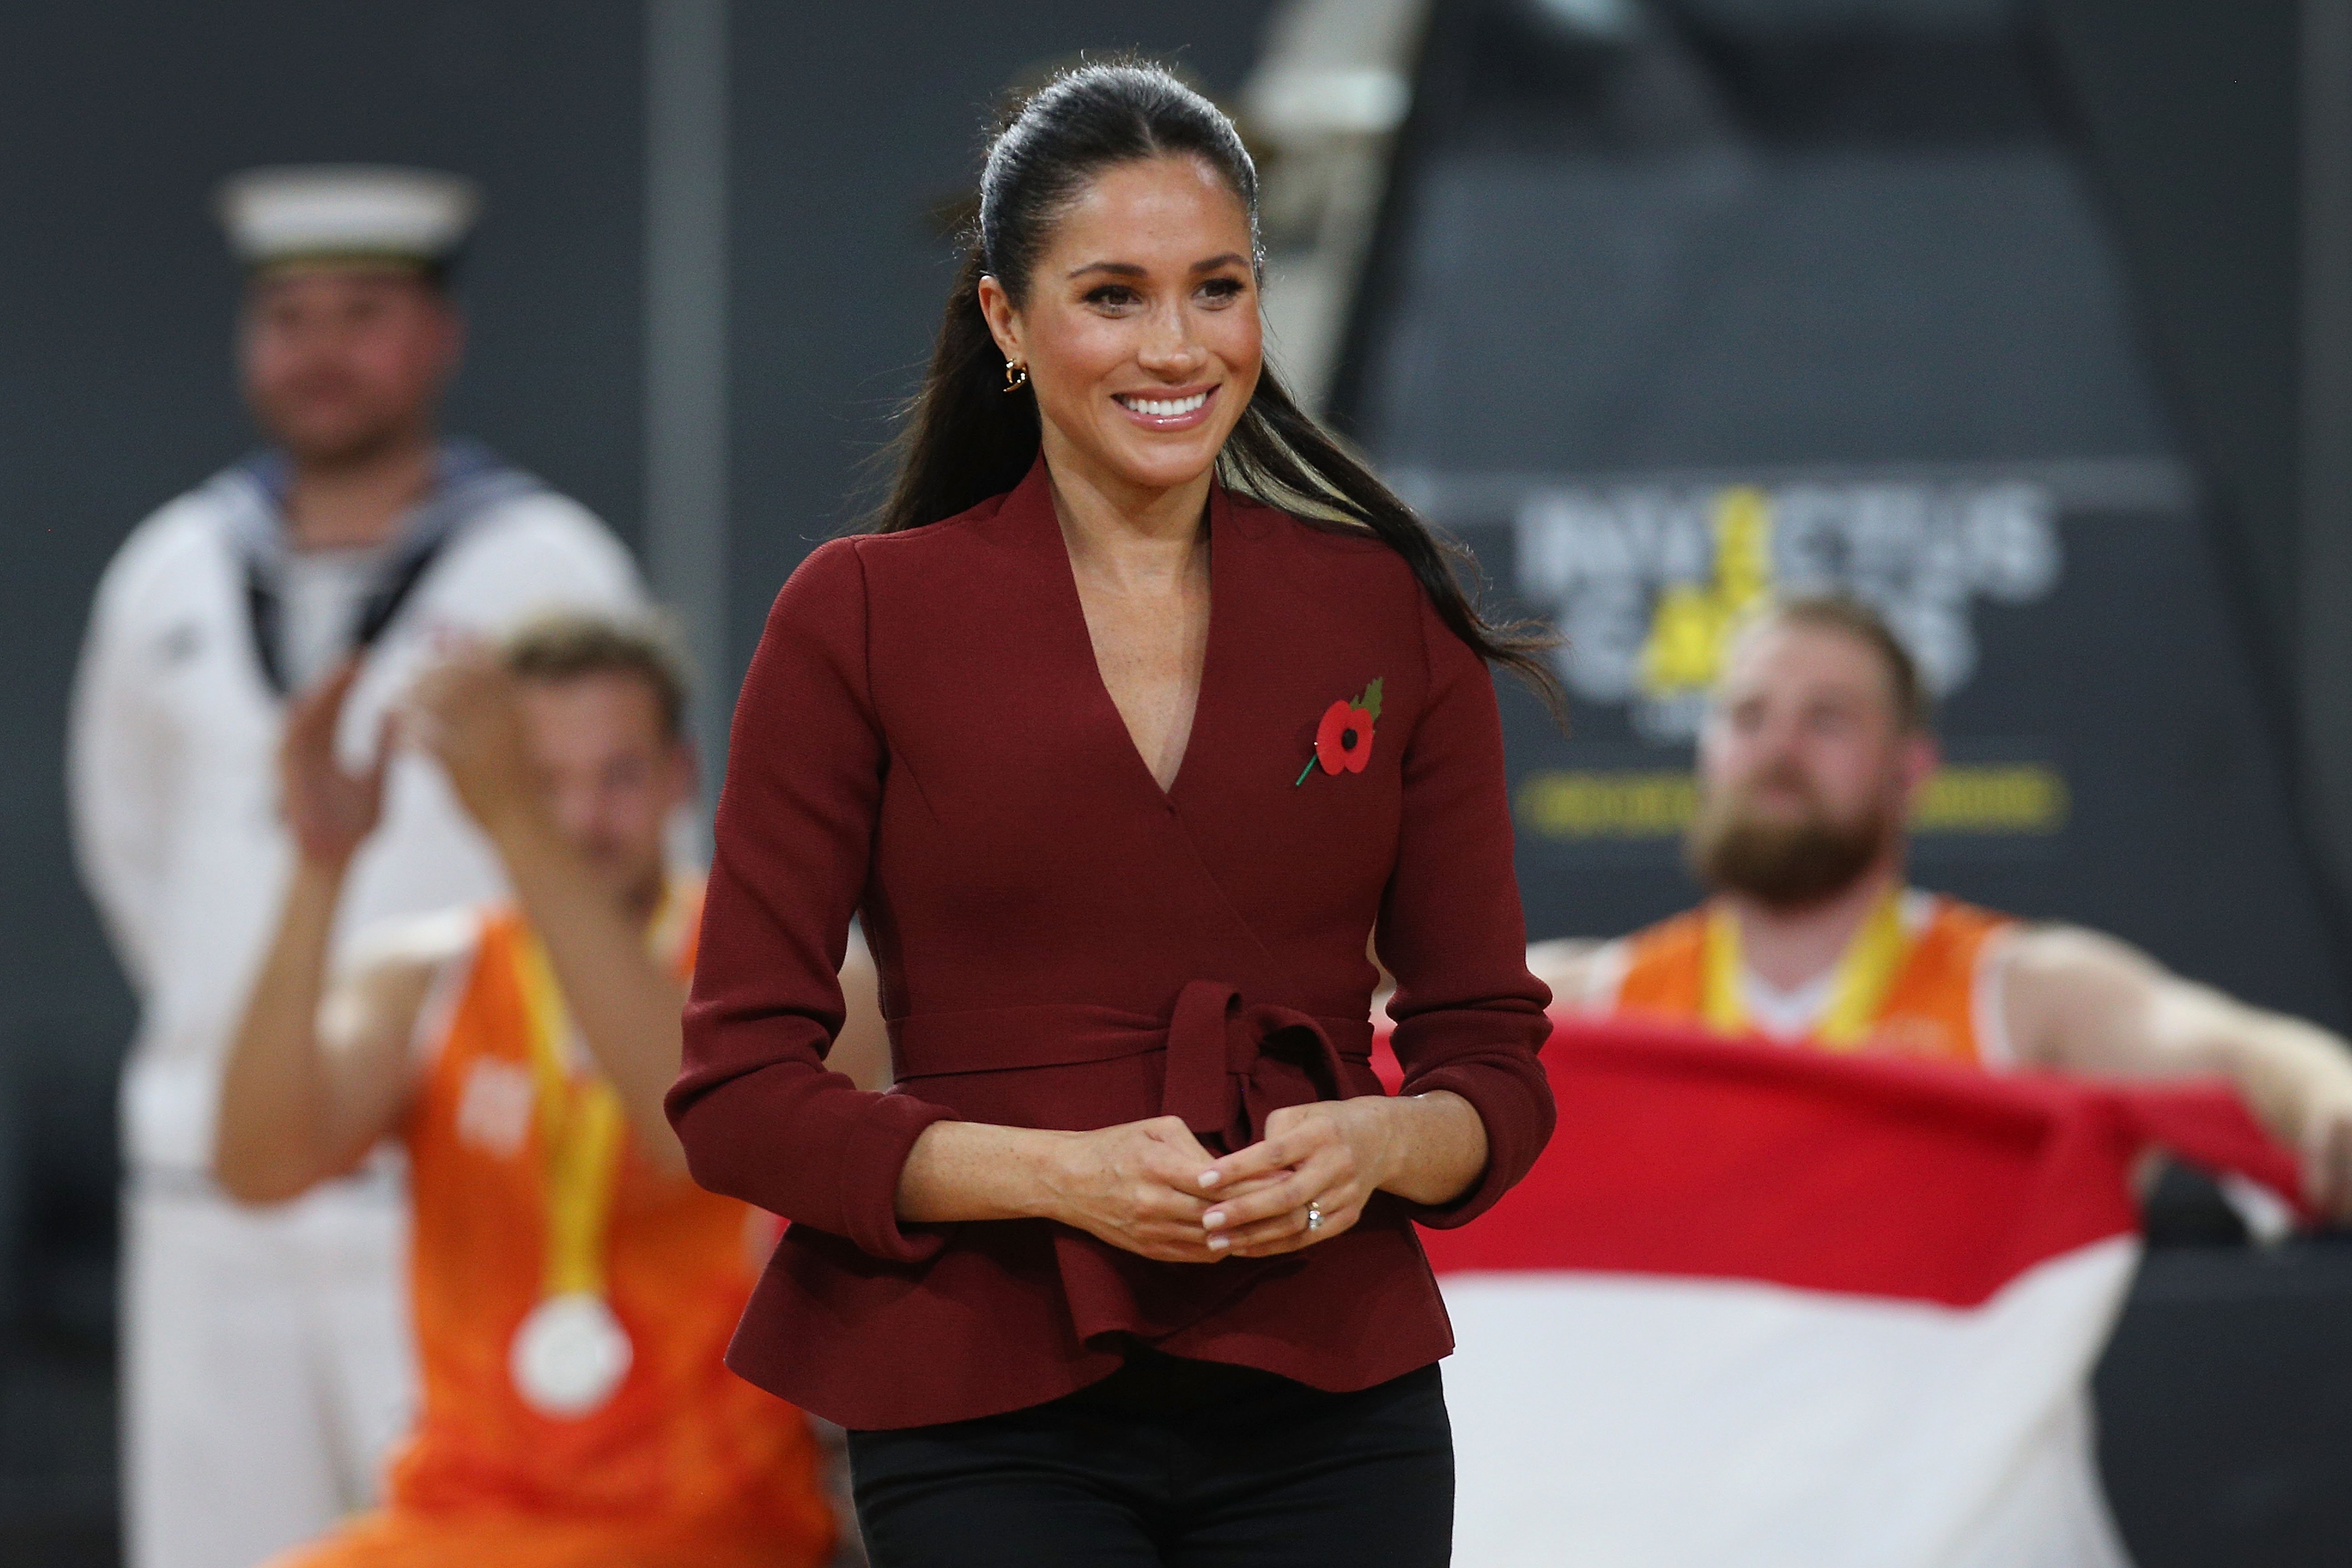 Meghan, Duchess of Sussex at the Invictus Games in Australia on October 27, 2018. Photo: Getty Images 